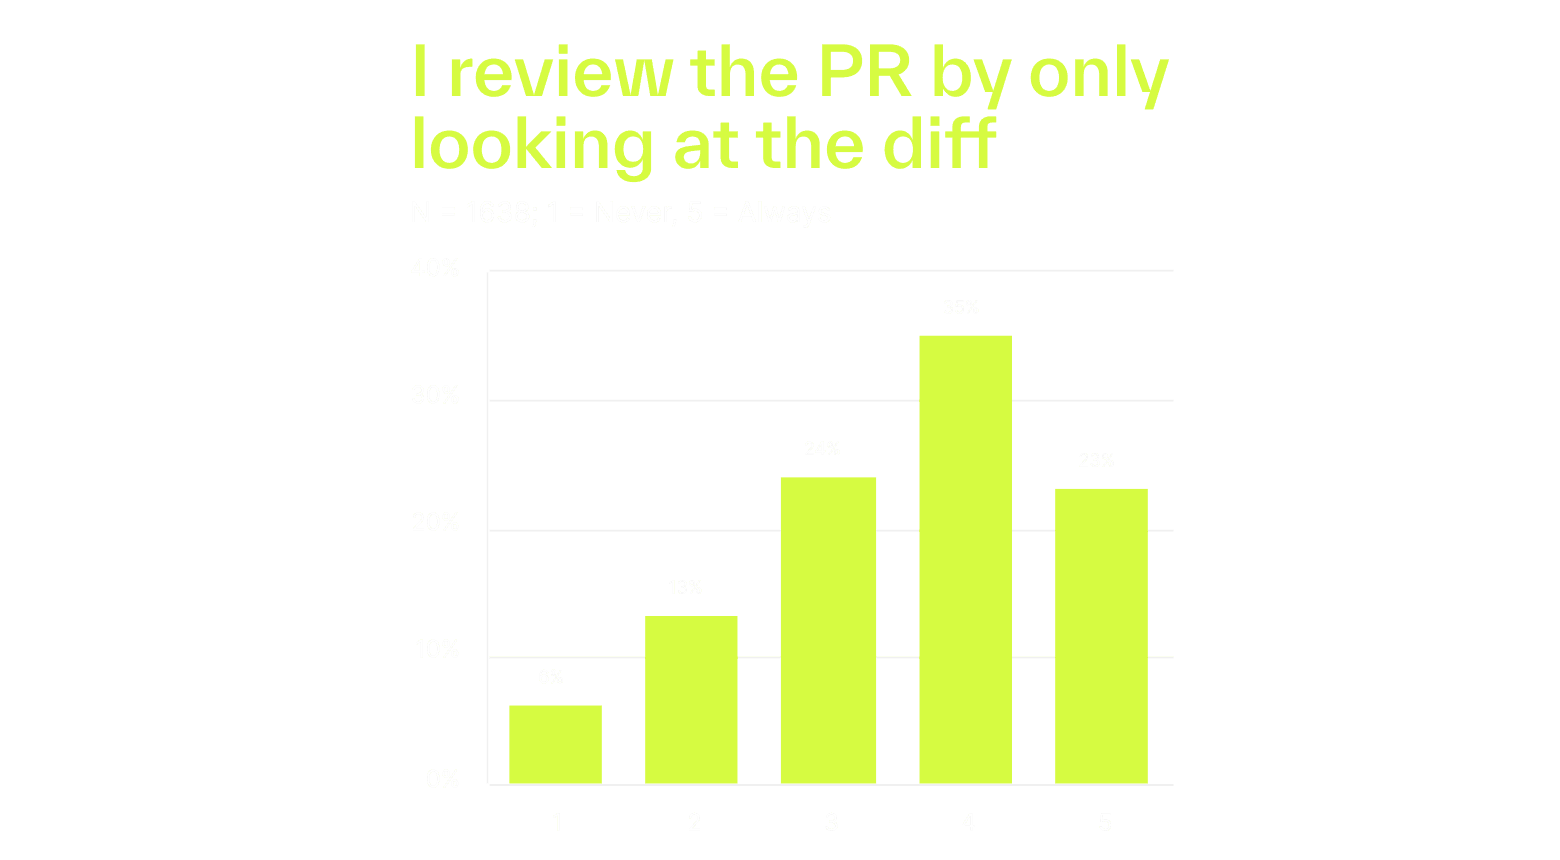 Most developers review PRs by only looking at the diff